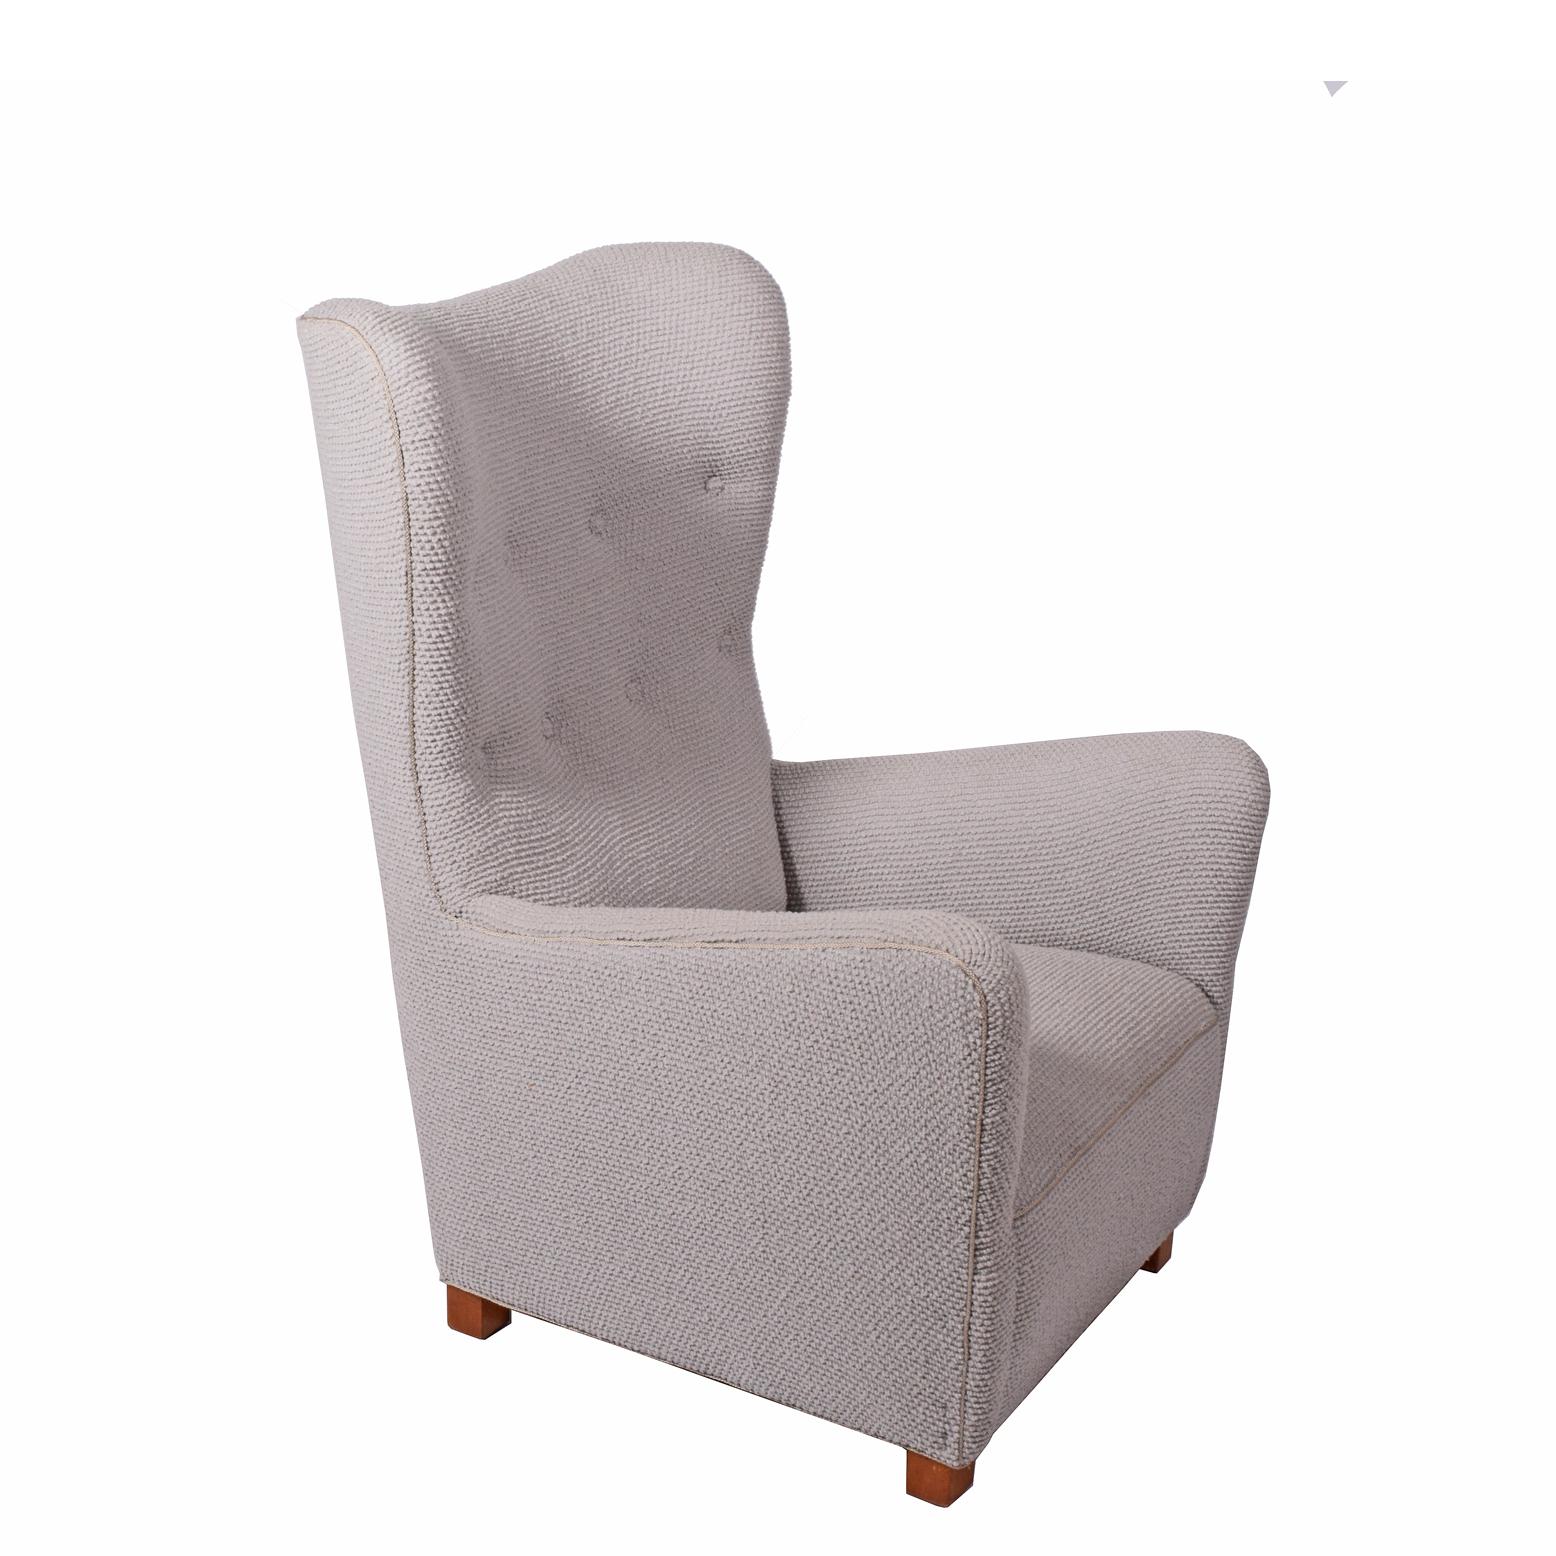 Free-form high back wing chair with large curved arms on original beechwood legs. Reupholstered in designer fabric. Made by Fritz Hansen in 1942. Catalog, page 12.